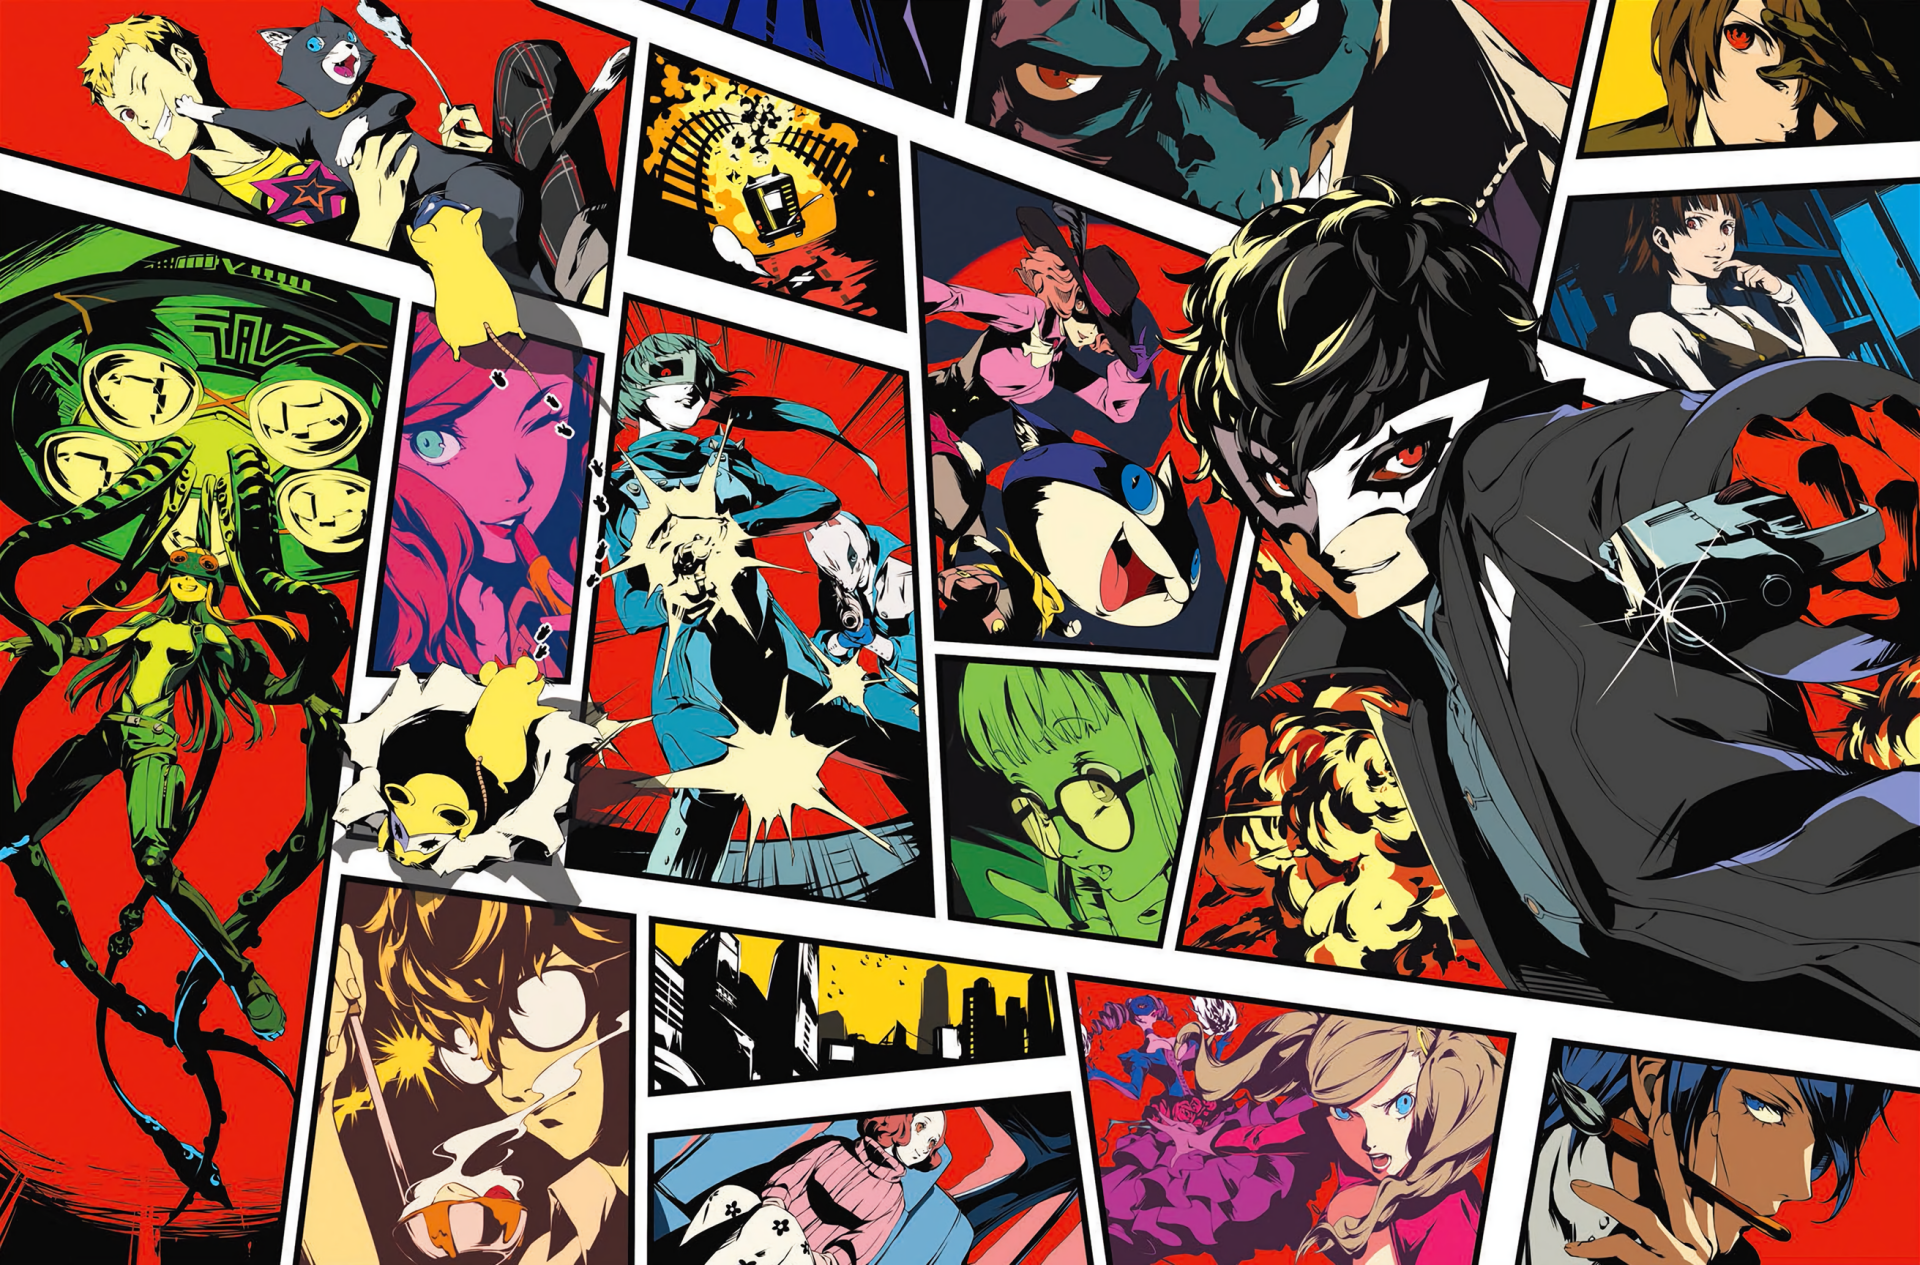 210 Persona 5 Hd Wallpapers Background Images